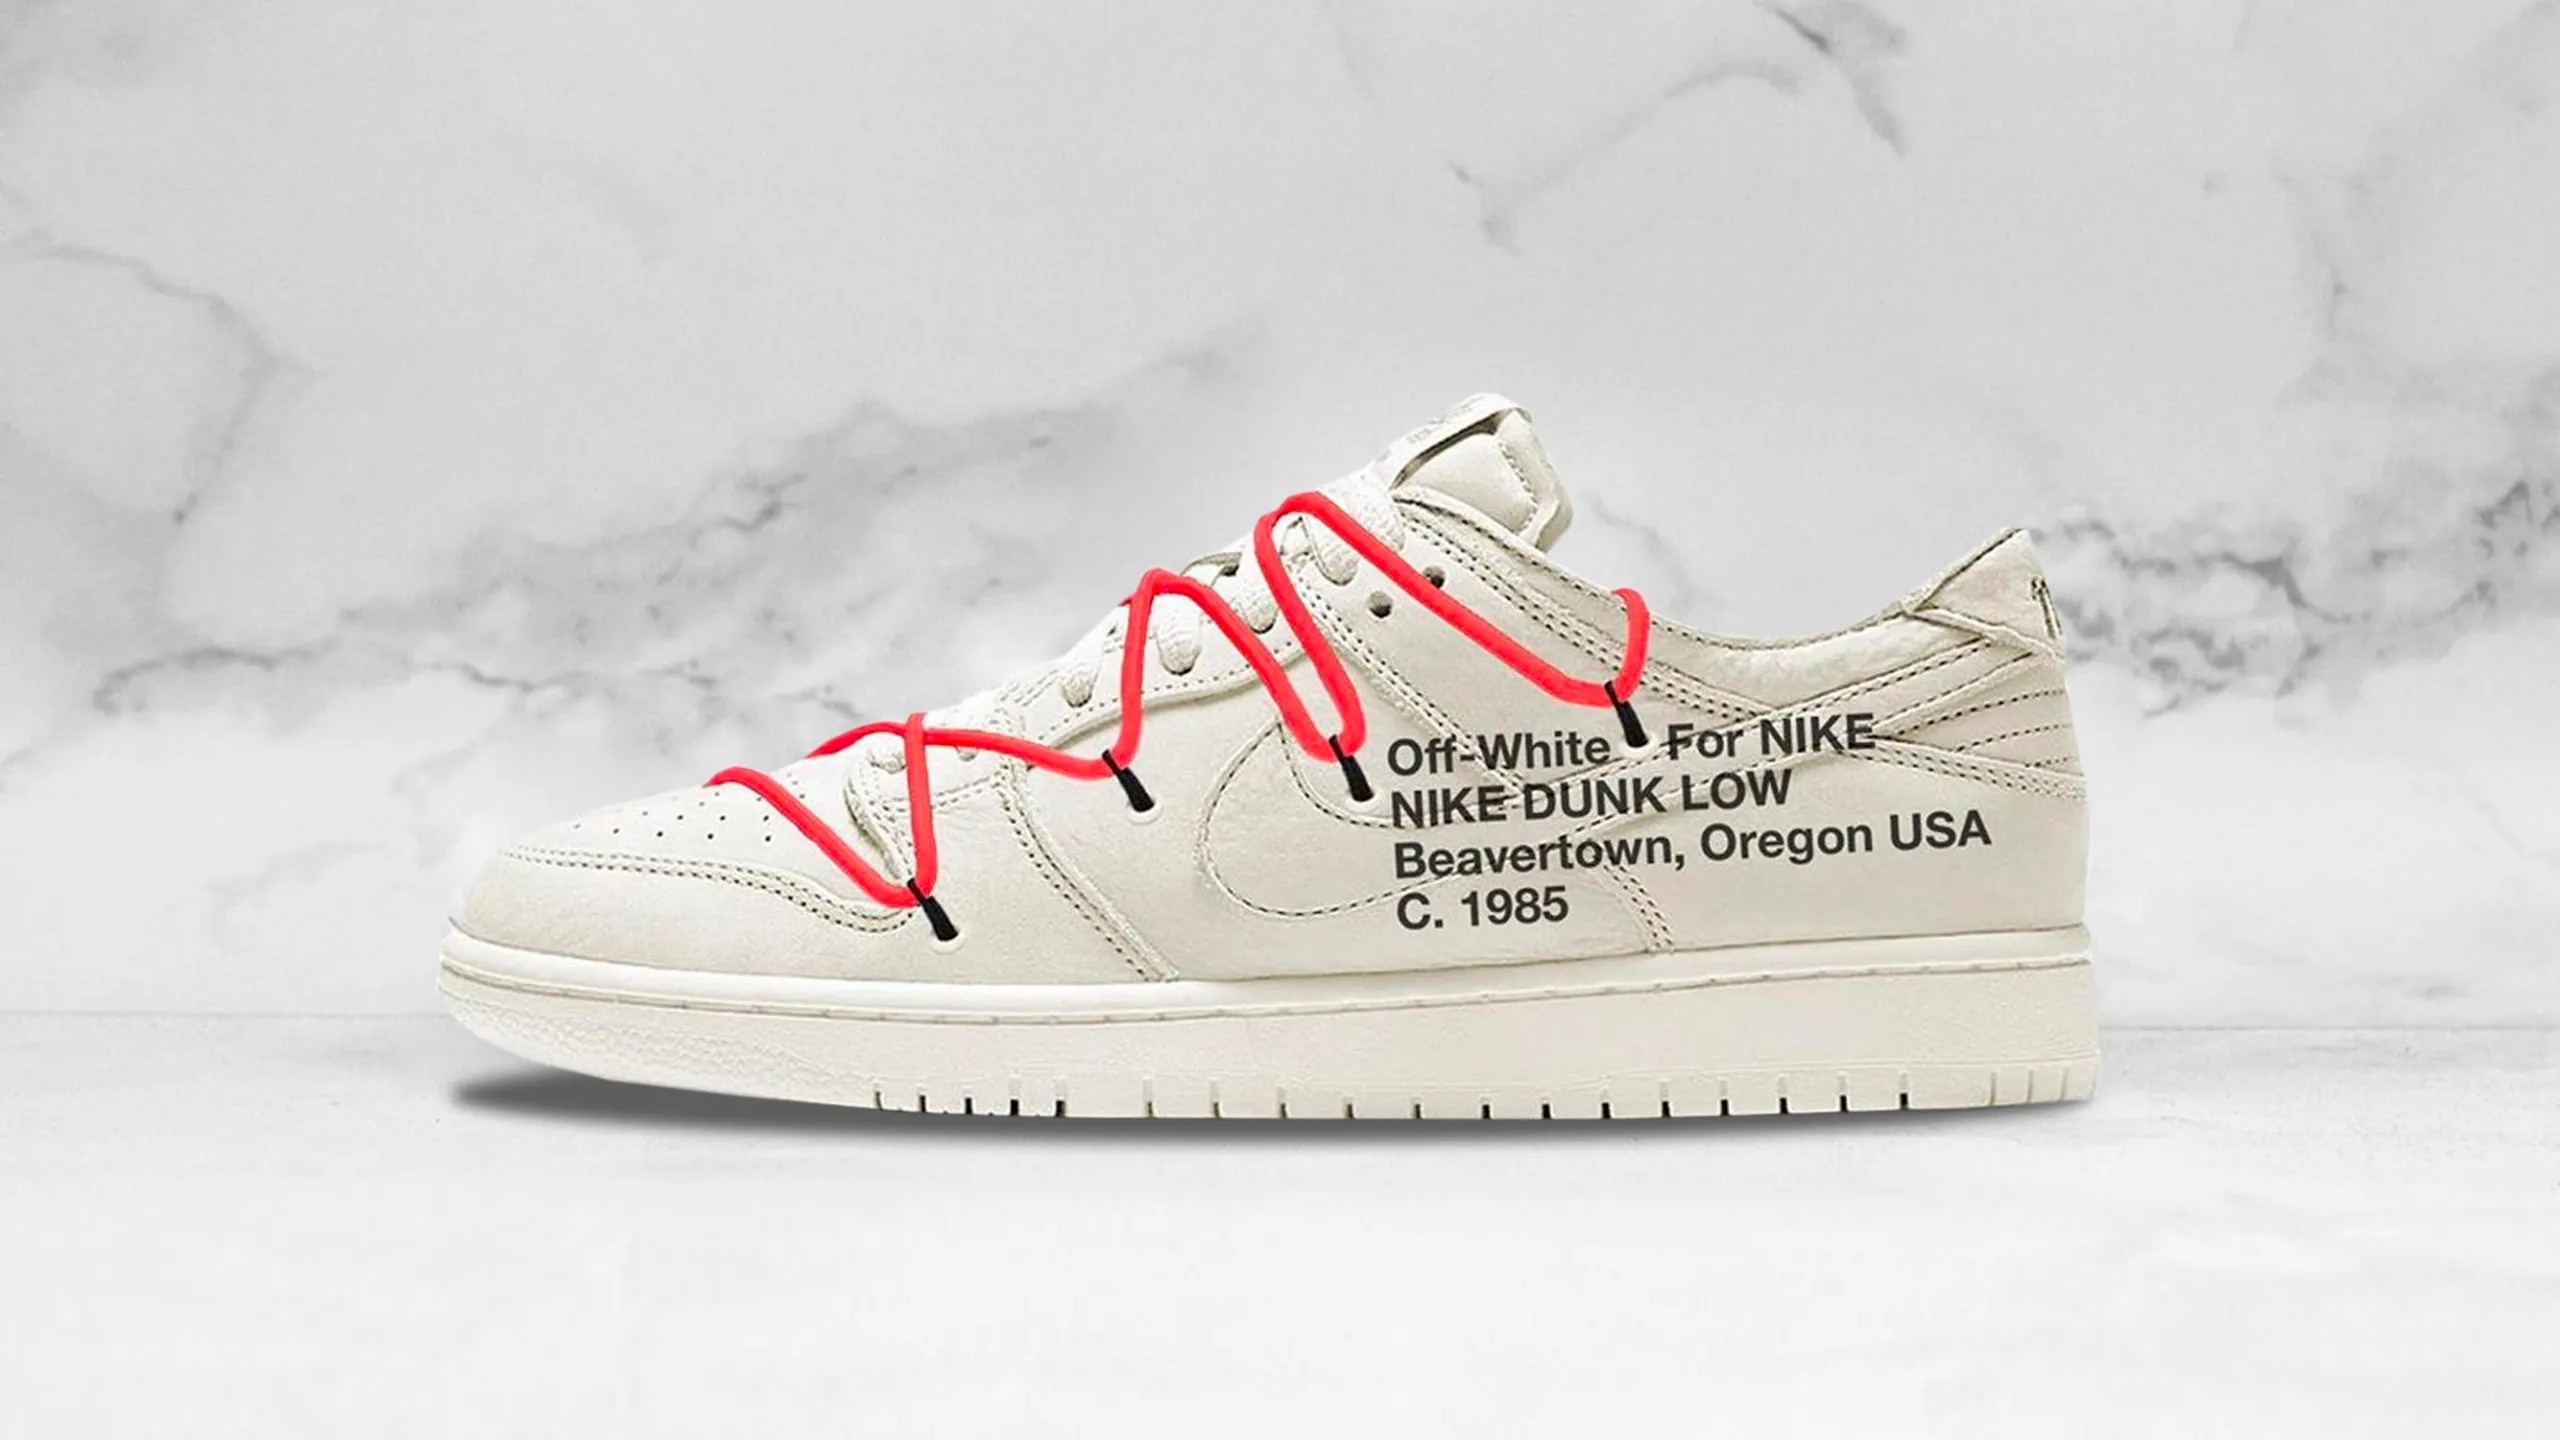 Virgil Abloh Teases the Off-White x Nike Dunk Low 